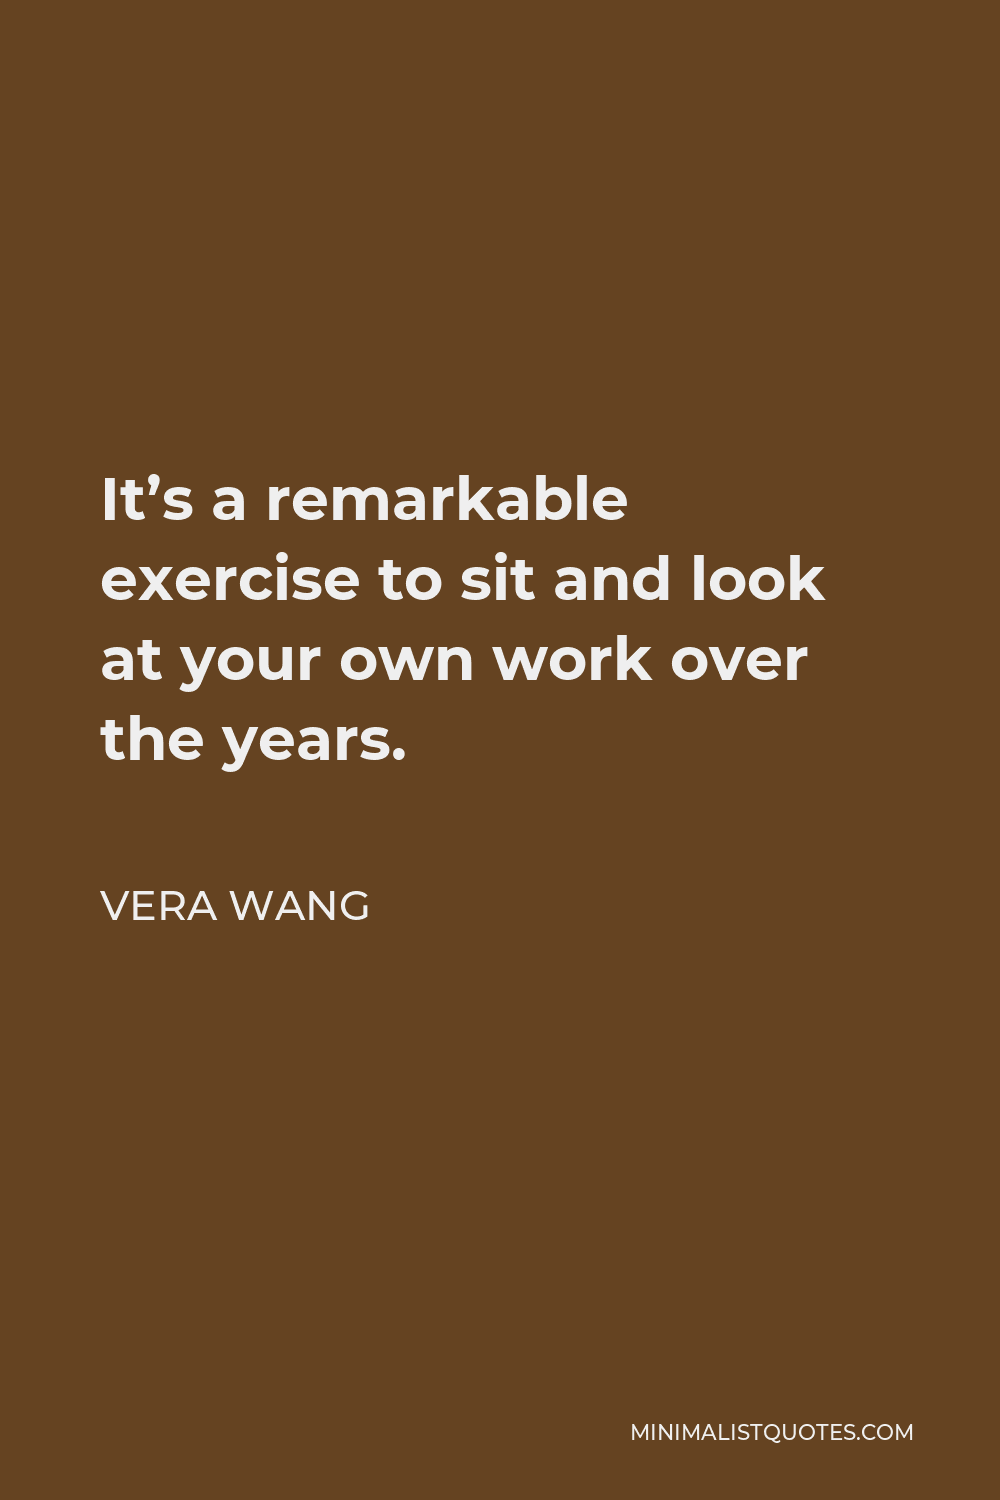 Vera Wang Quote - It’s a remarkable exercise to sit and look at your own work over the years.